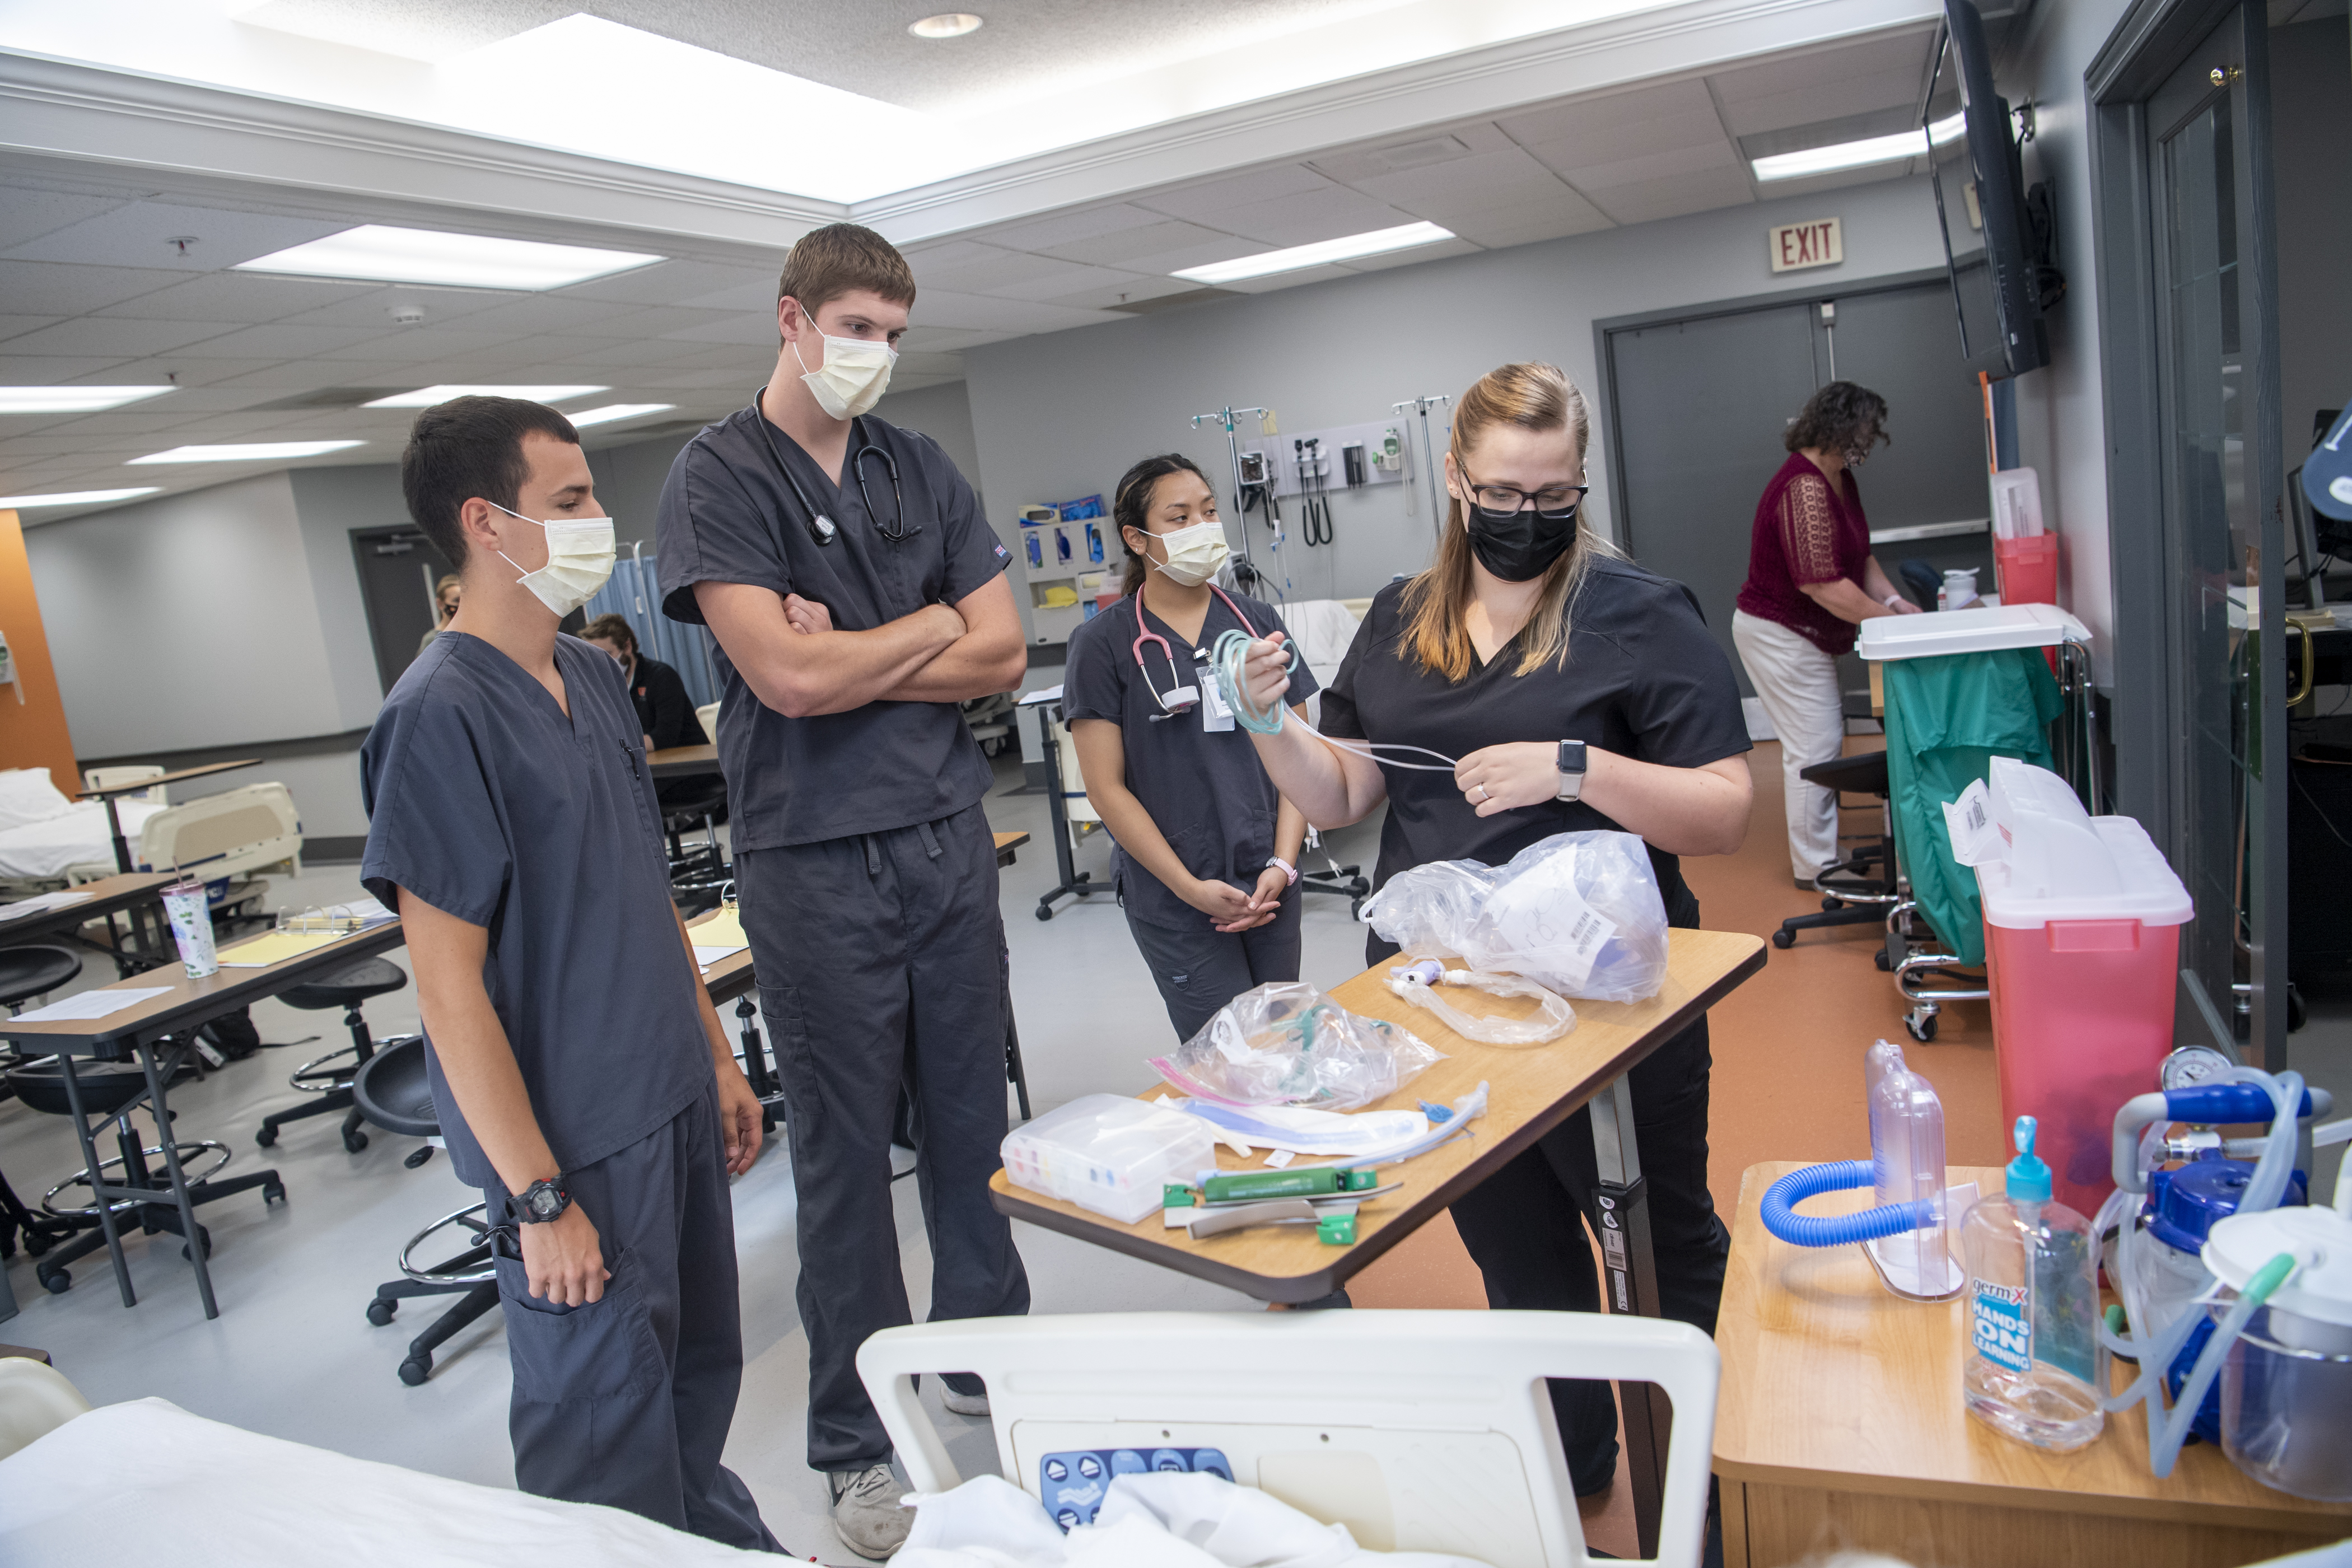 Nursing students learning hands-on.